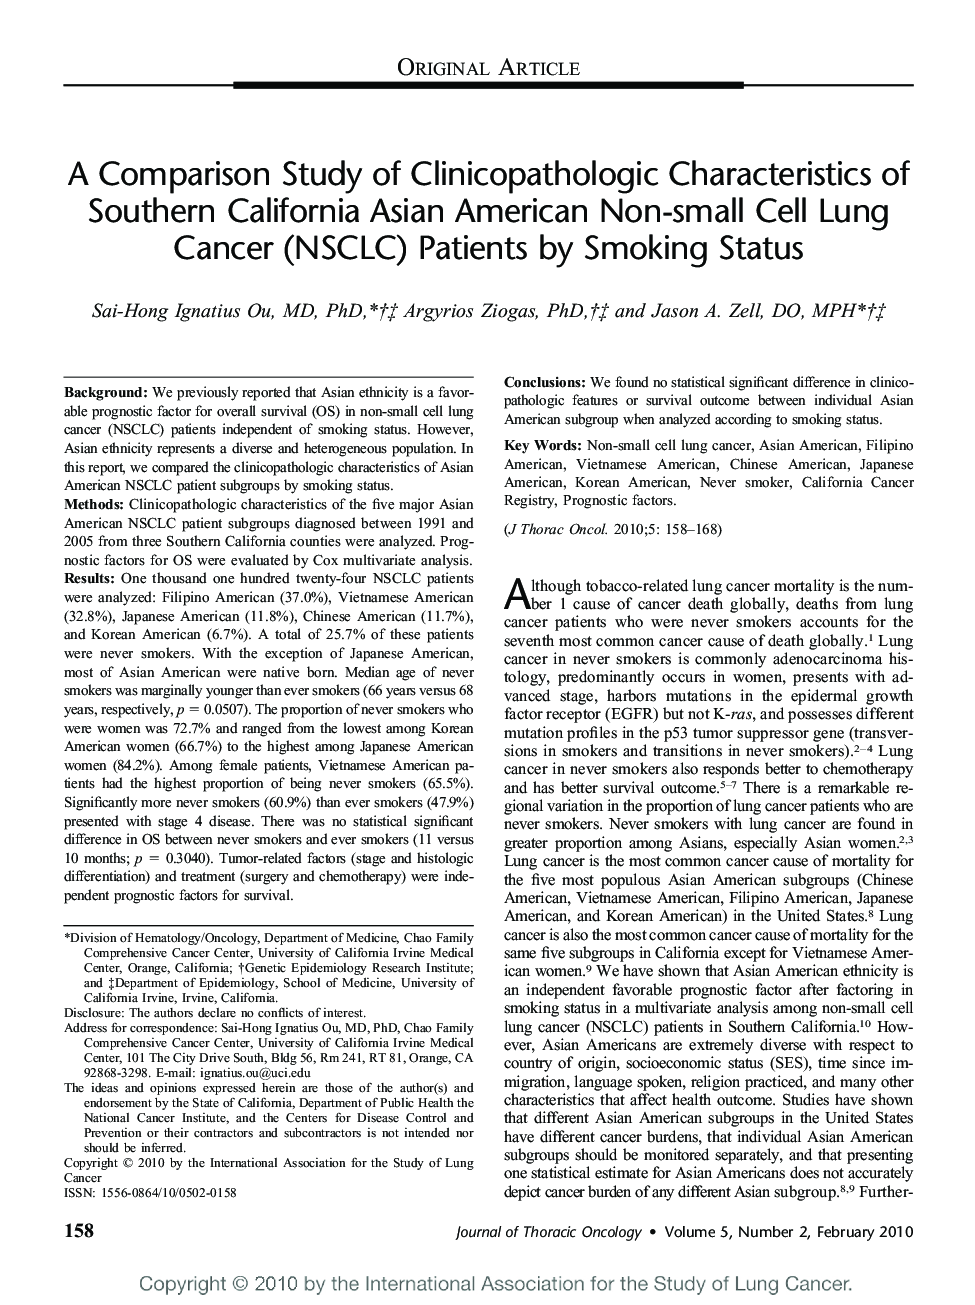 A Comparison Study of Clinicopathologic Characteristics of Southern California Asian American Non-small Cell Lung Cancer (NSCLC) Patients by Smoking Status 